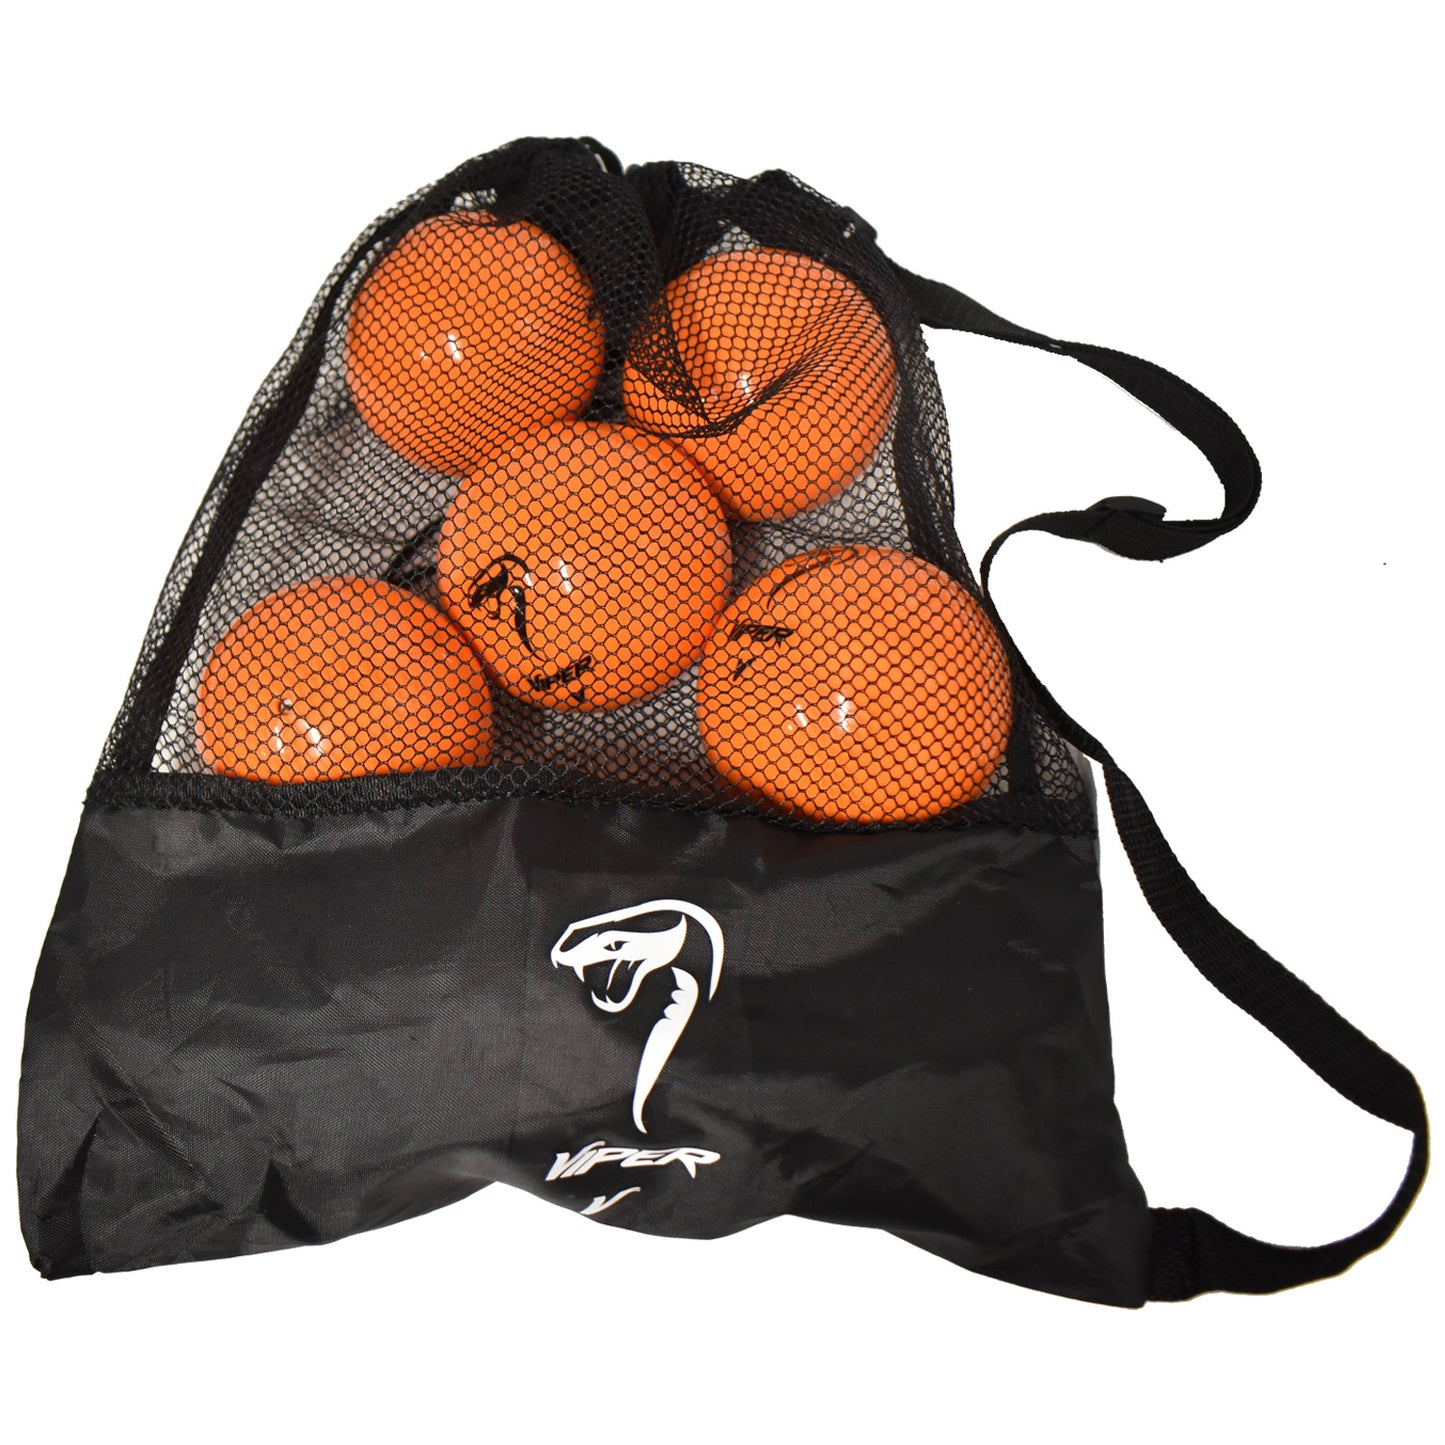 Viper Sports Weighted Practice Balls (9 inch)